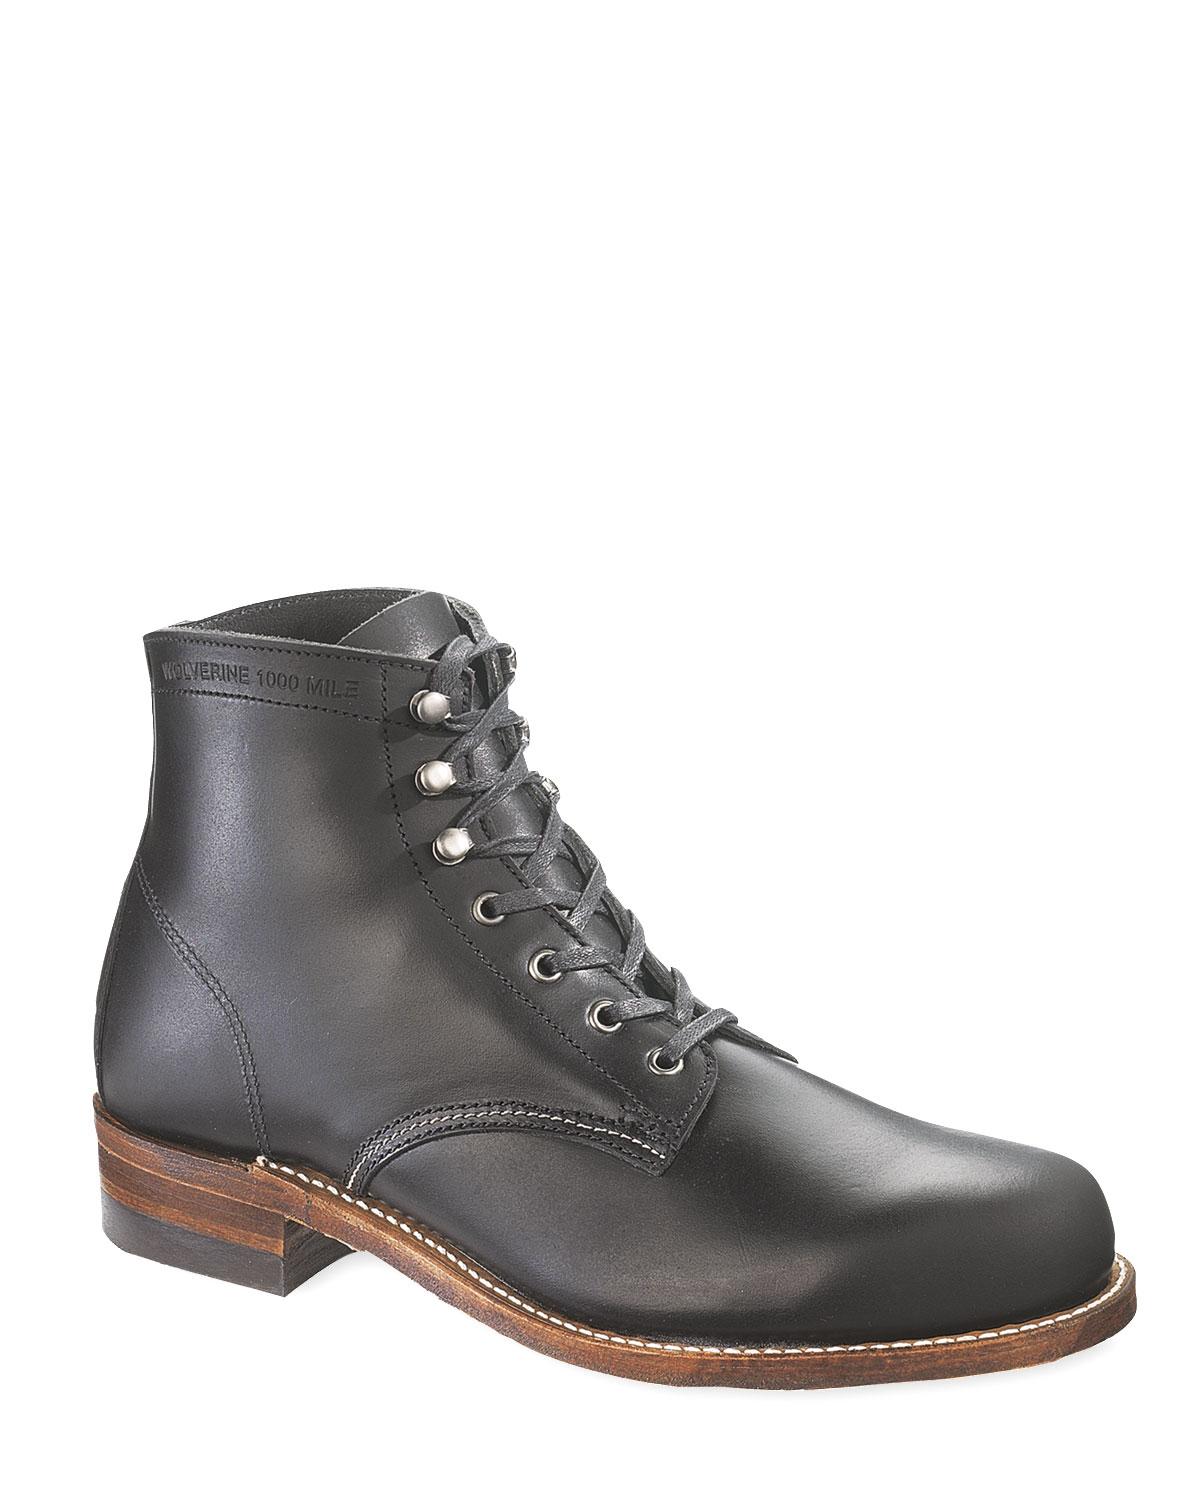 Wolverine Leather 1000 Mile Boot in Black - Save 7% - Lyst